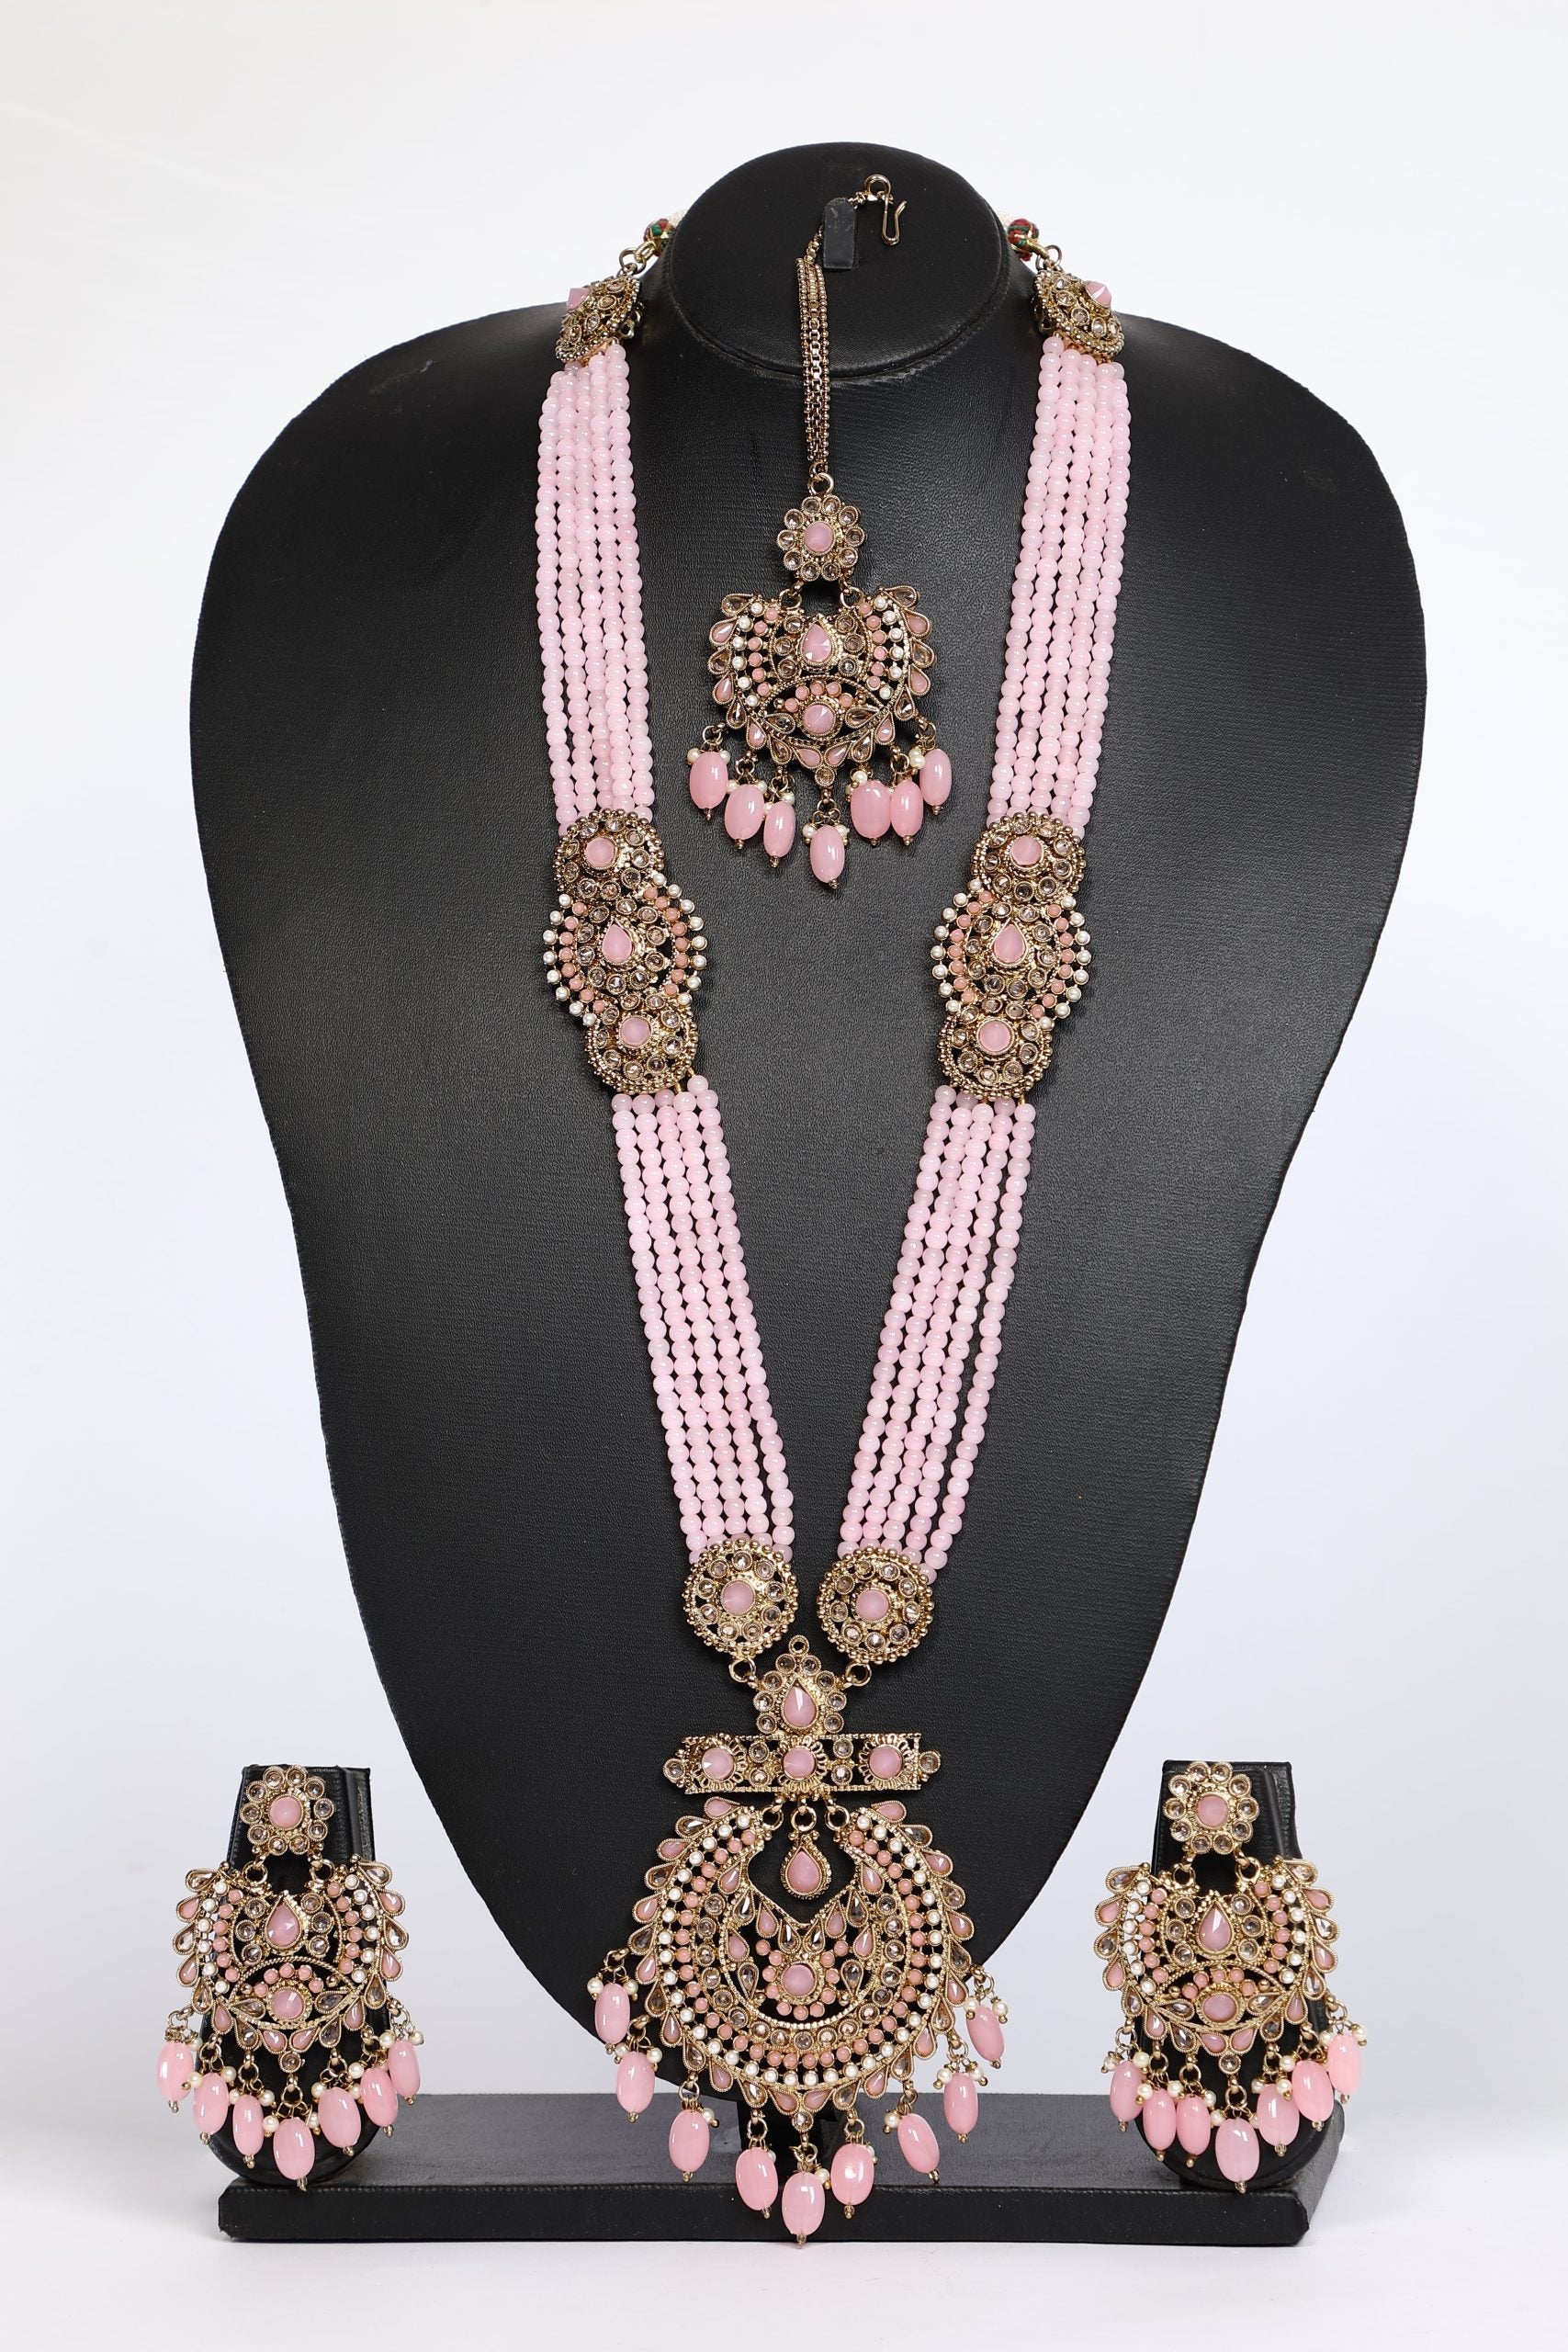 Beaded Heavy Long Necklace Set in Baby Pink Color For Bridal – 3596